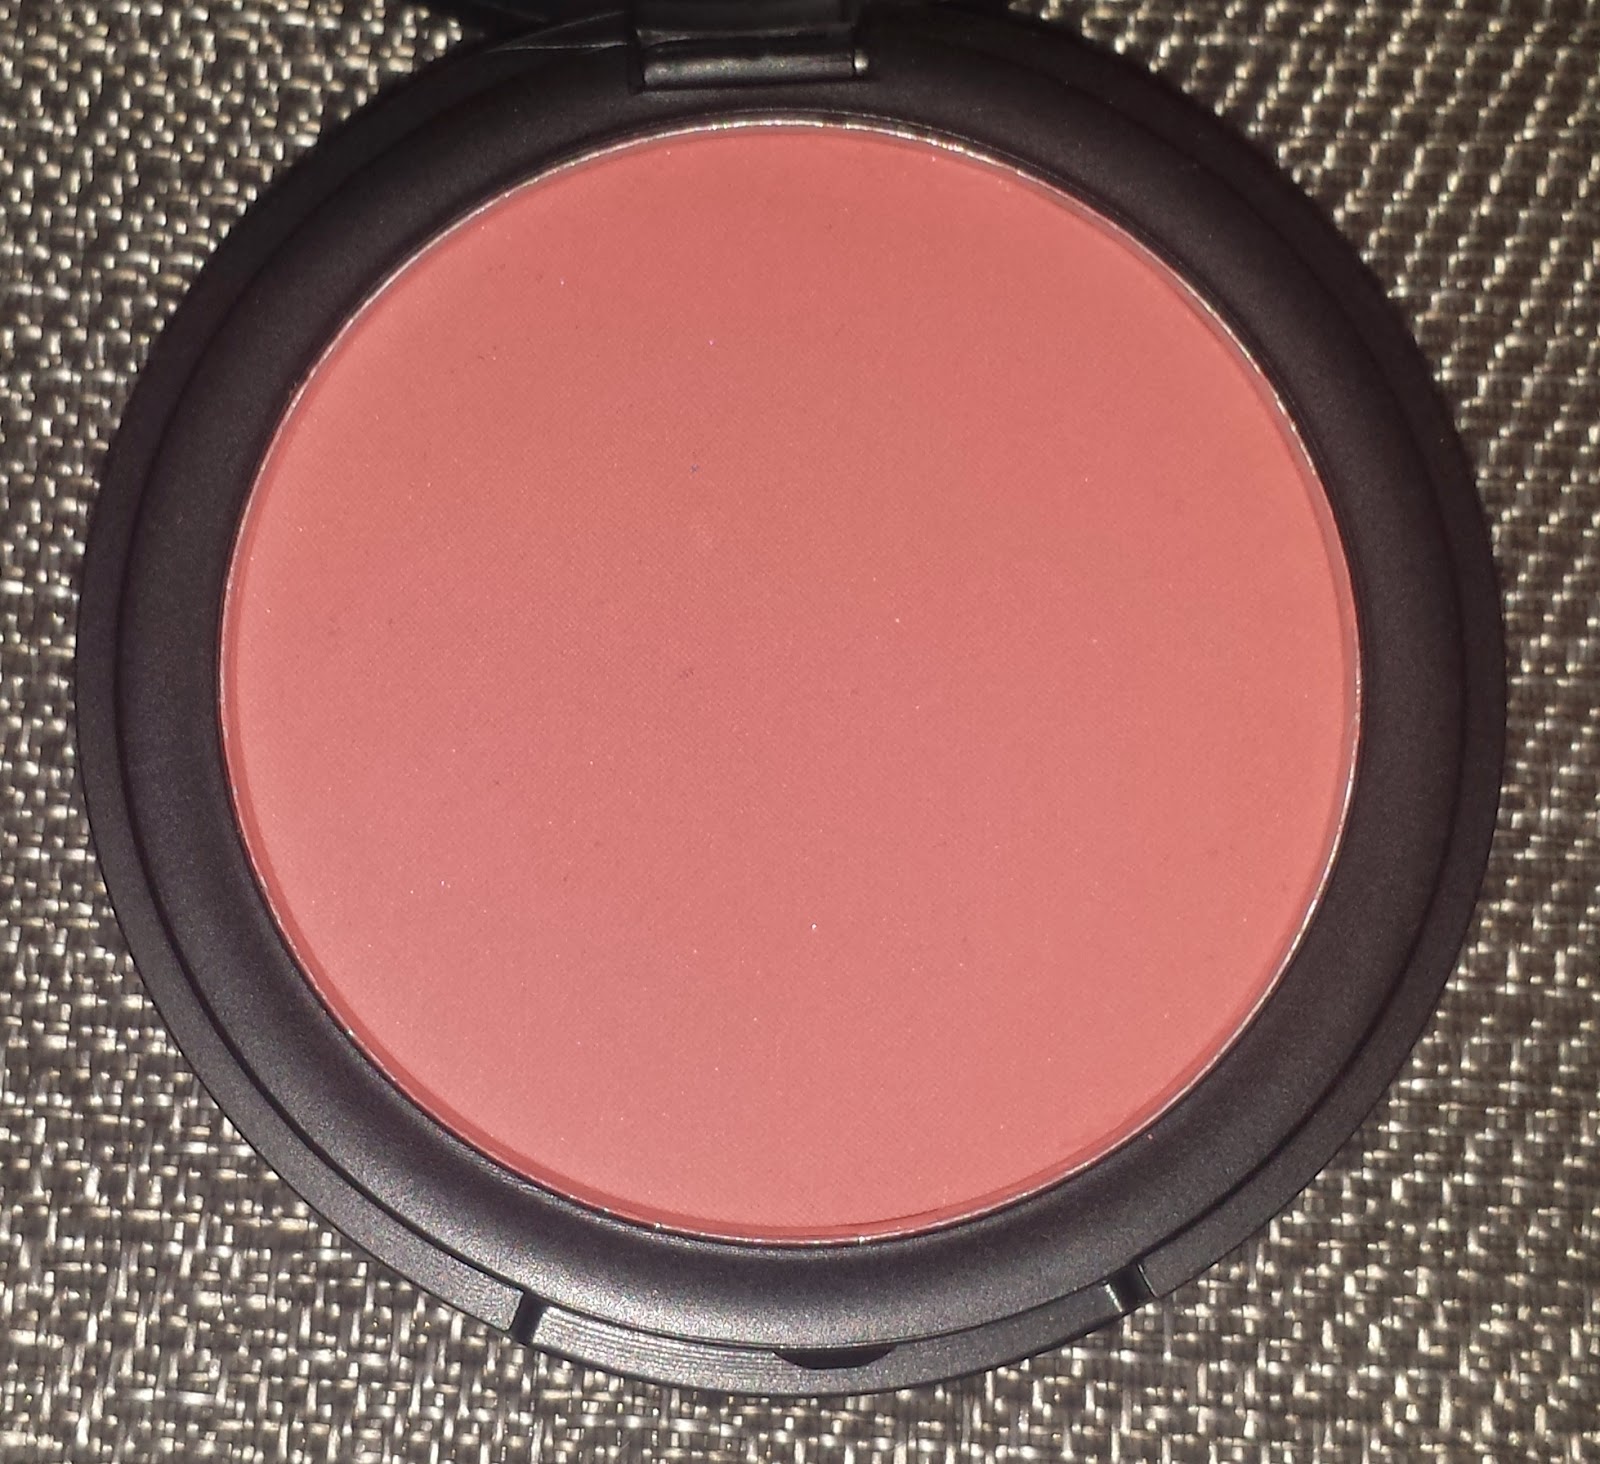 Review: City Color Cosmetics Be Matte Blushes